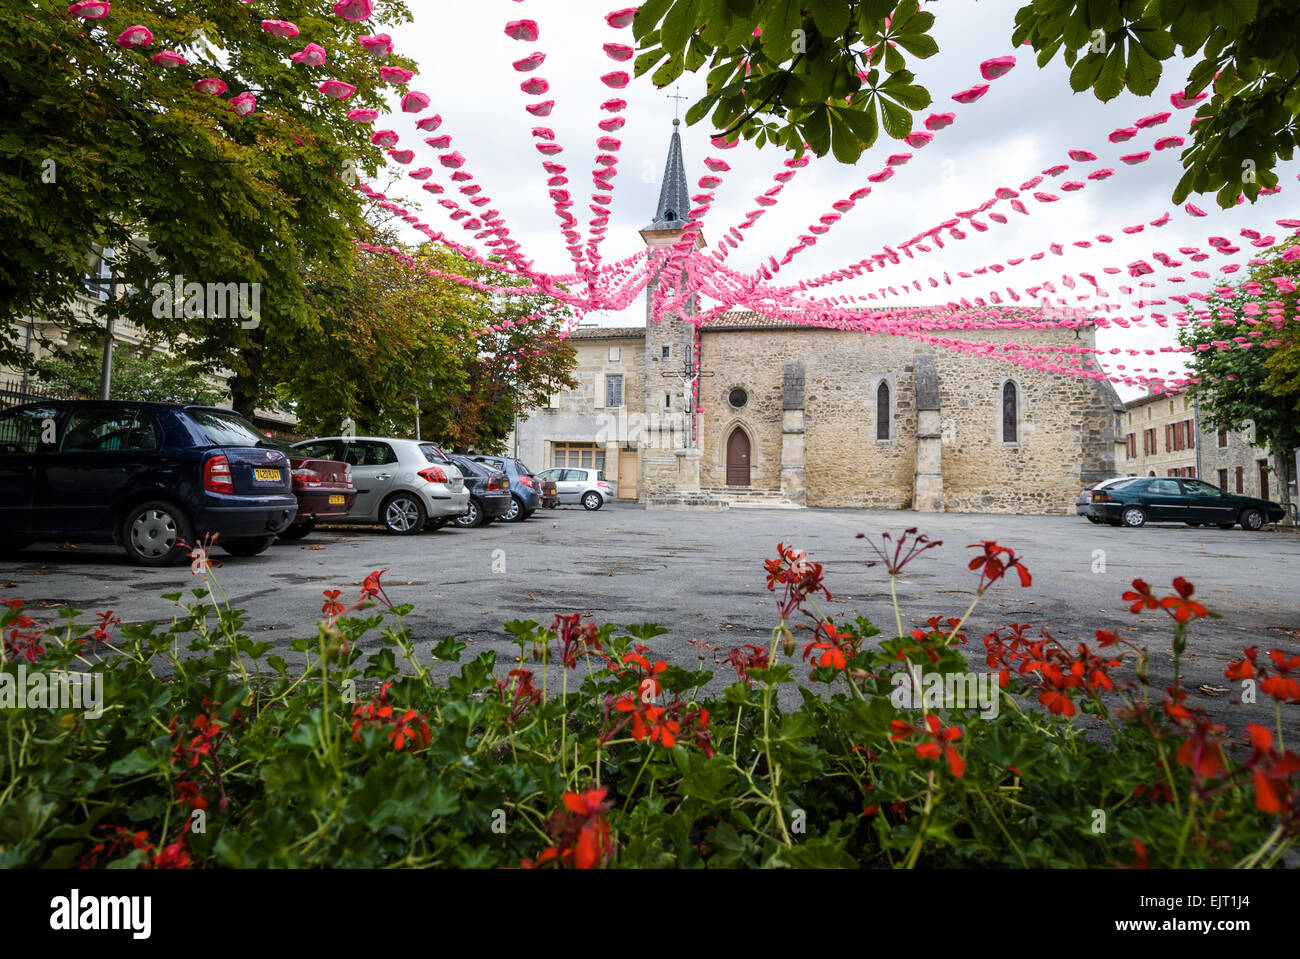 Colourful display of pink and white paper flowers draped across a town square  in Villefranche de Longchat, France. Stock Photo